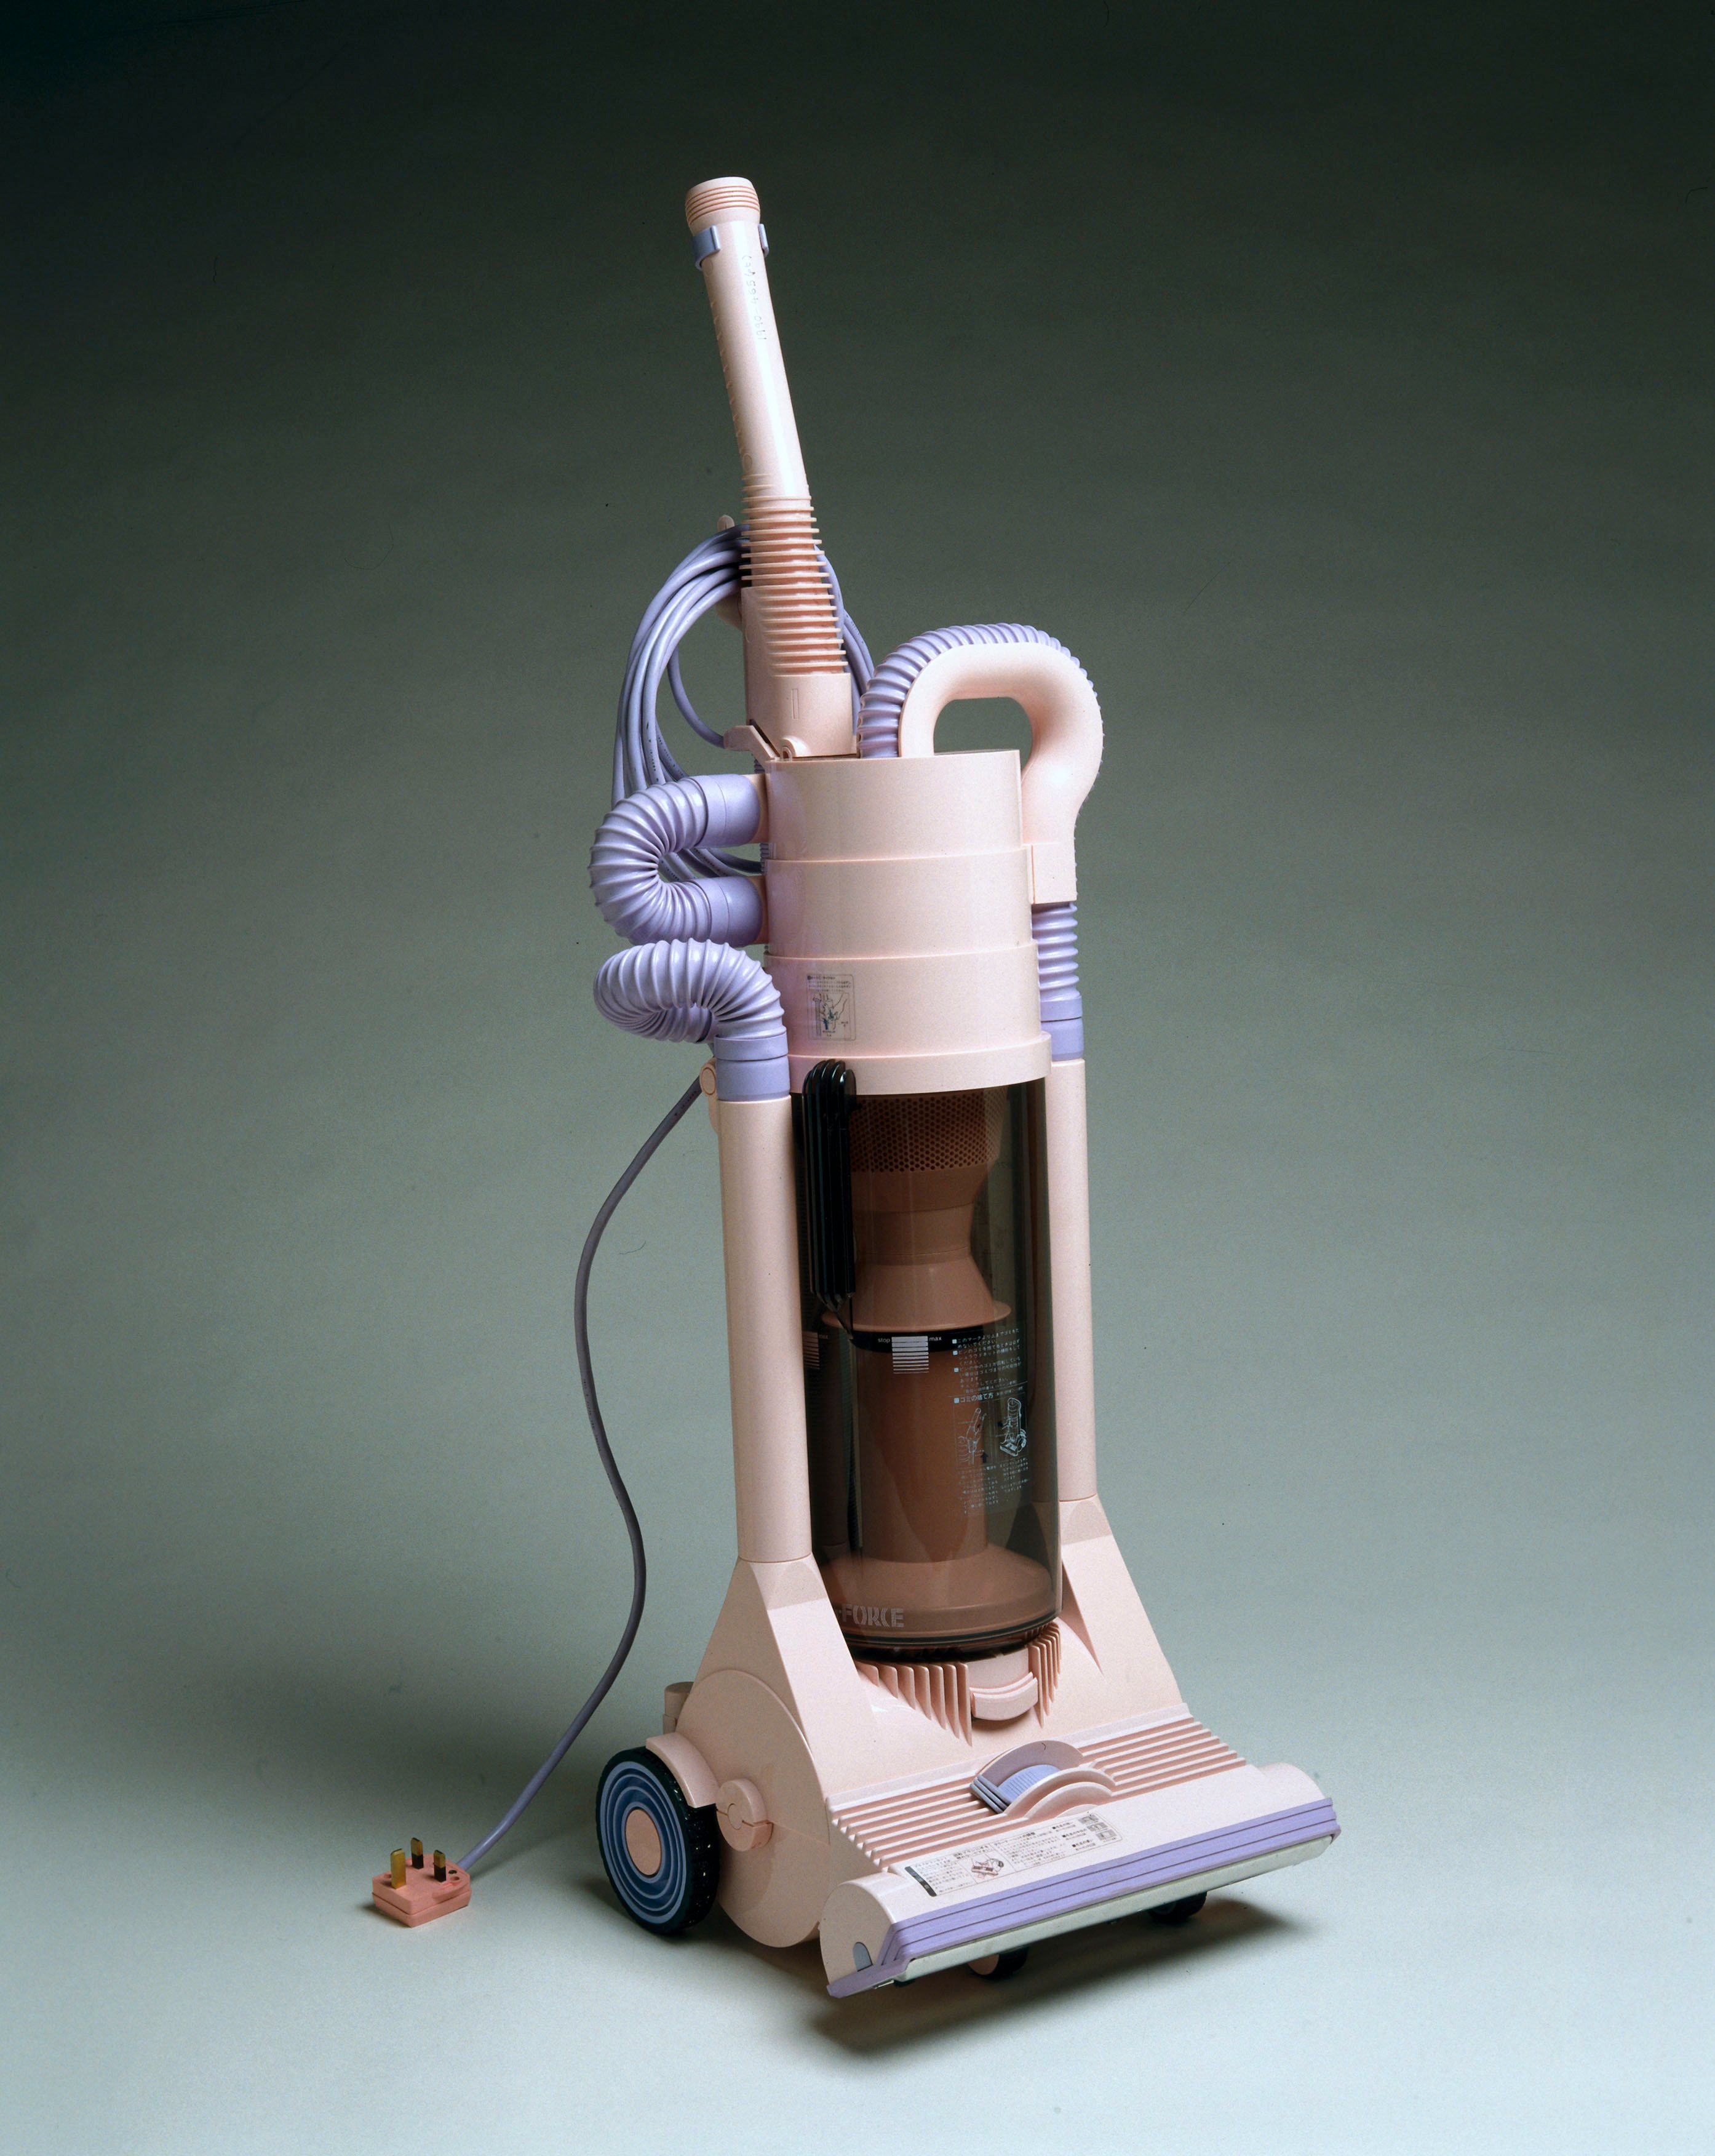 Dyson G-Force Cyclonic vacuum cleaner, 1990.